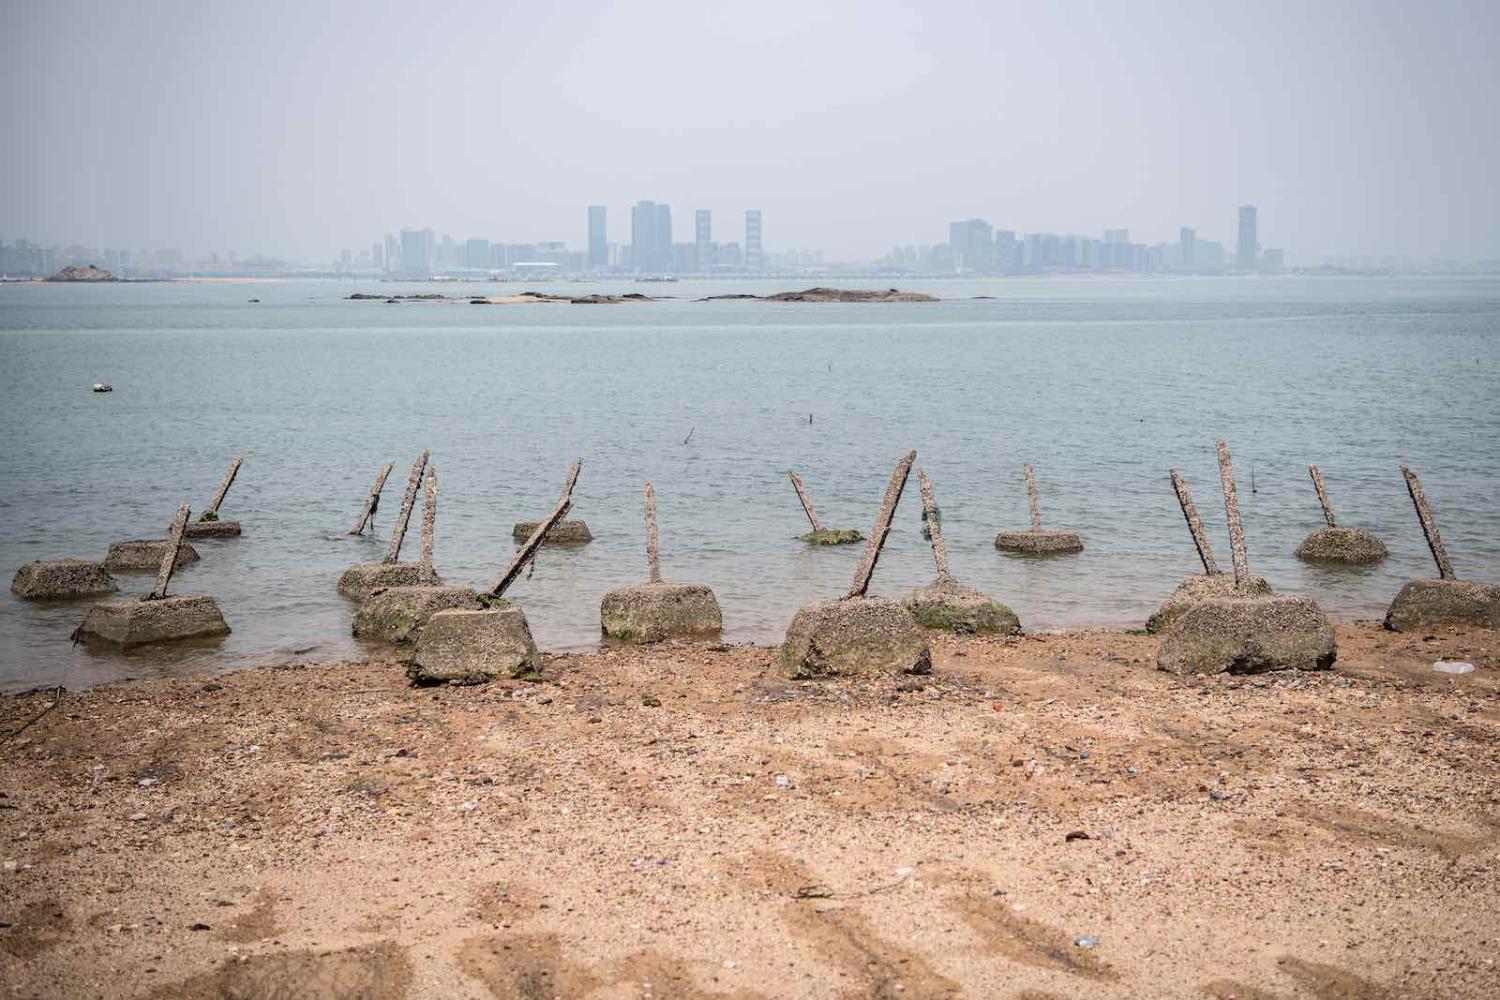 Anti-landing barricades on a beach facing China on Taiwan’s Little Kinmen island, which lies only a few kilometres from mainland China (Carl Court/Getty Images)